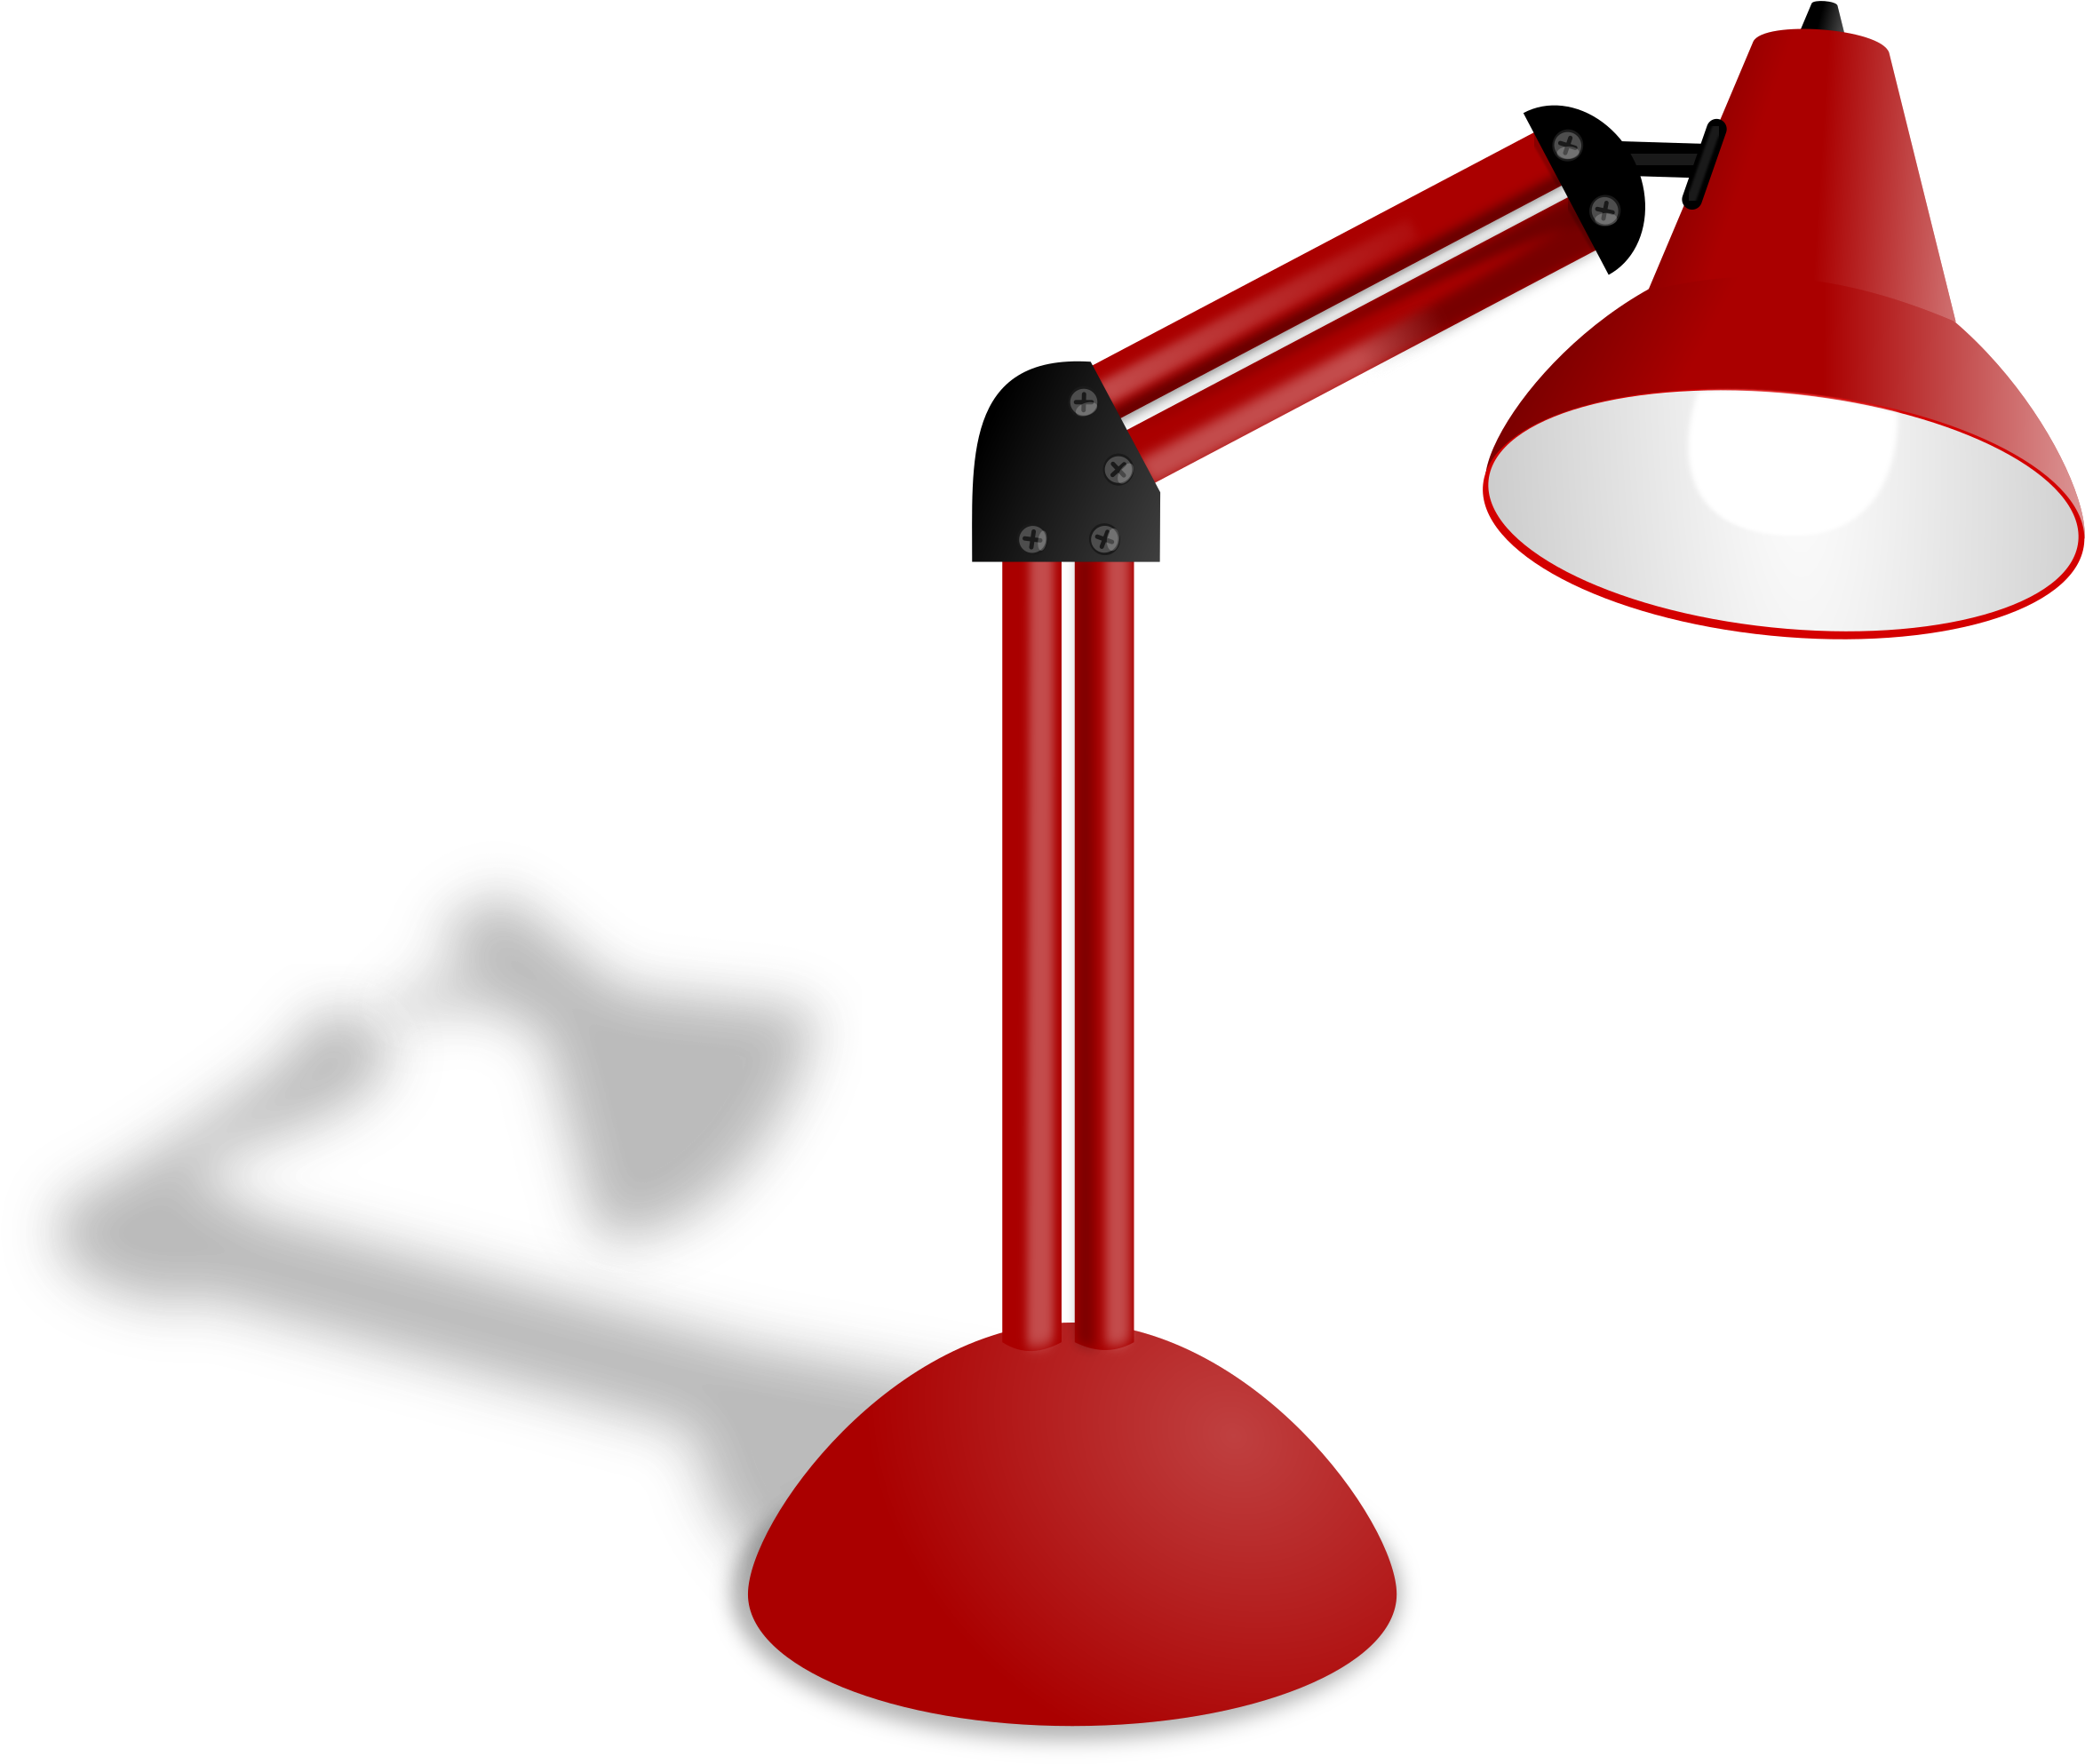 Photorealistic Red Lamp - Study Tips Clip Art (2400x2020)